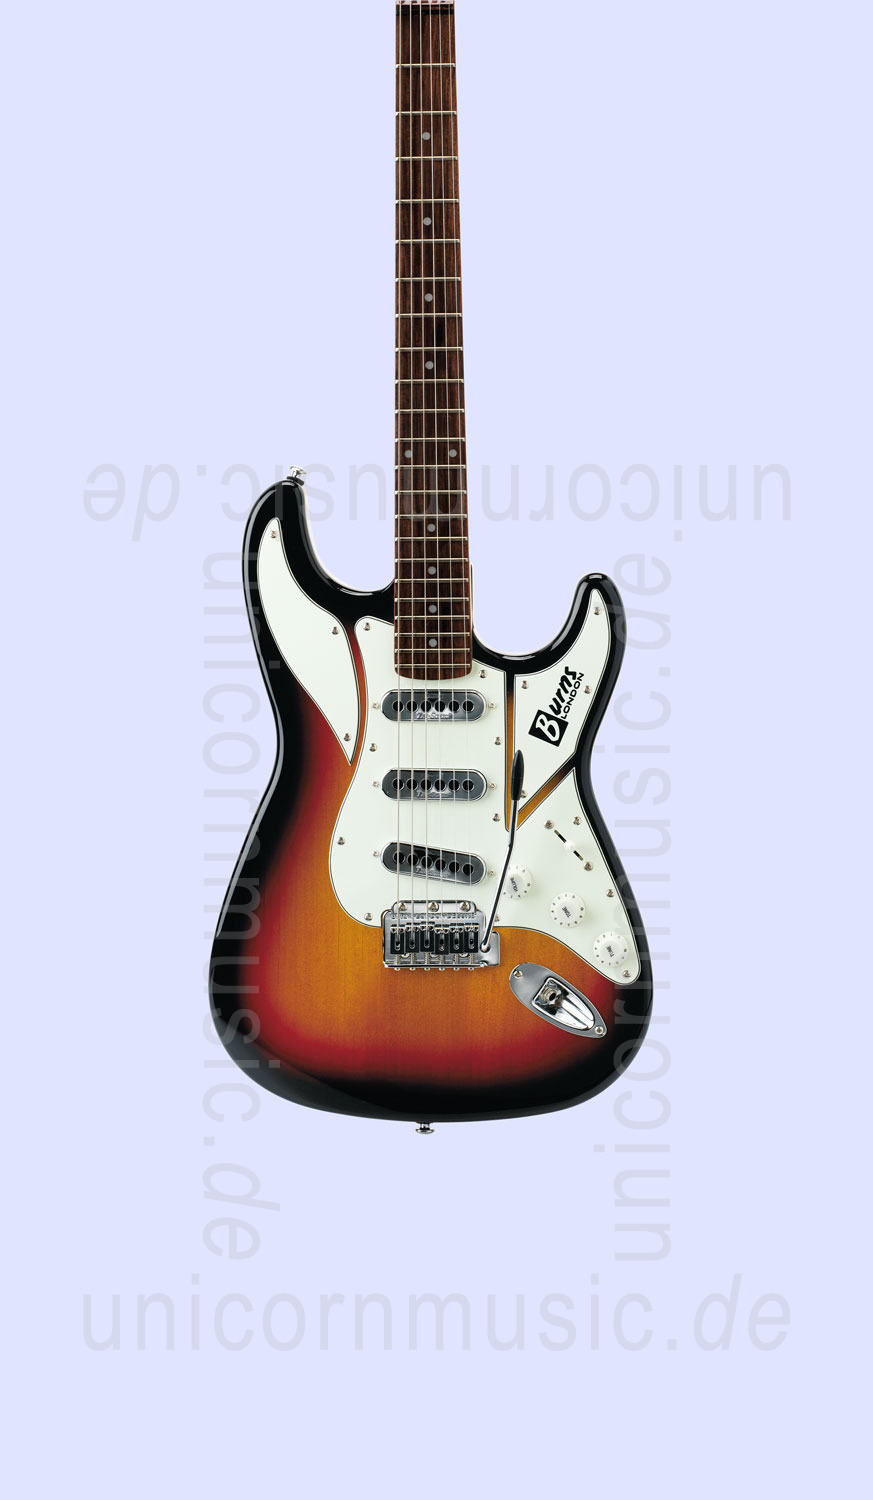 to article description / price Electric Guitar BURNS COBRA - guards red or other colours